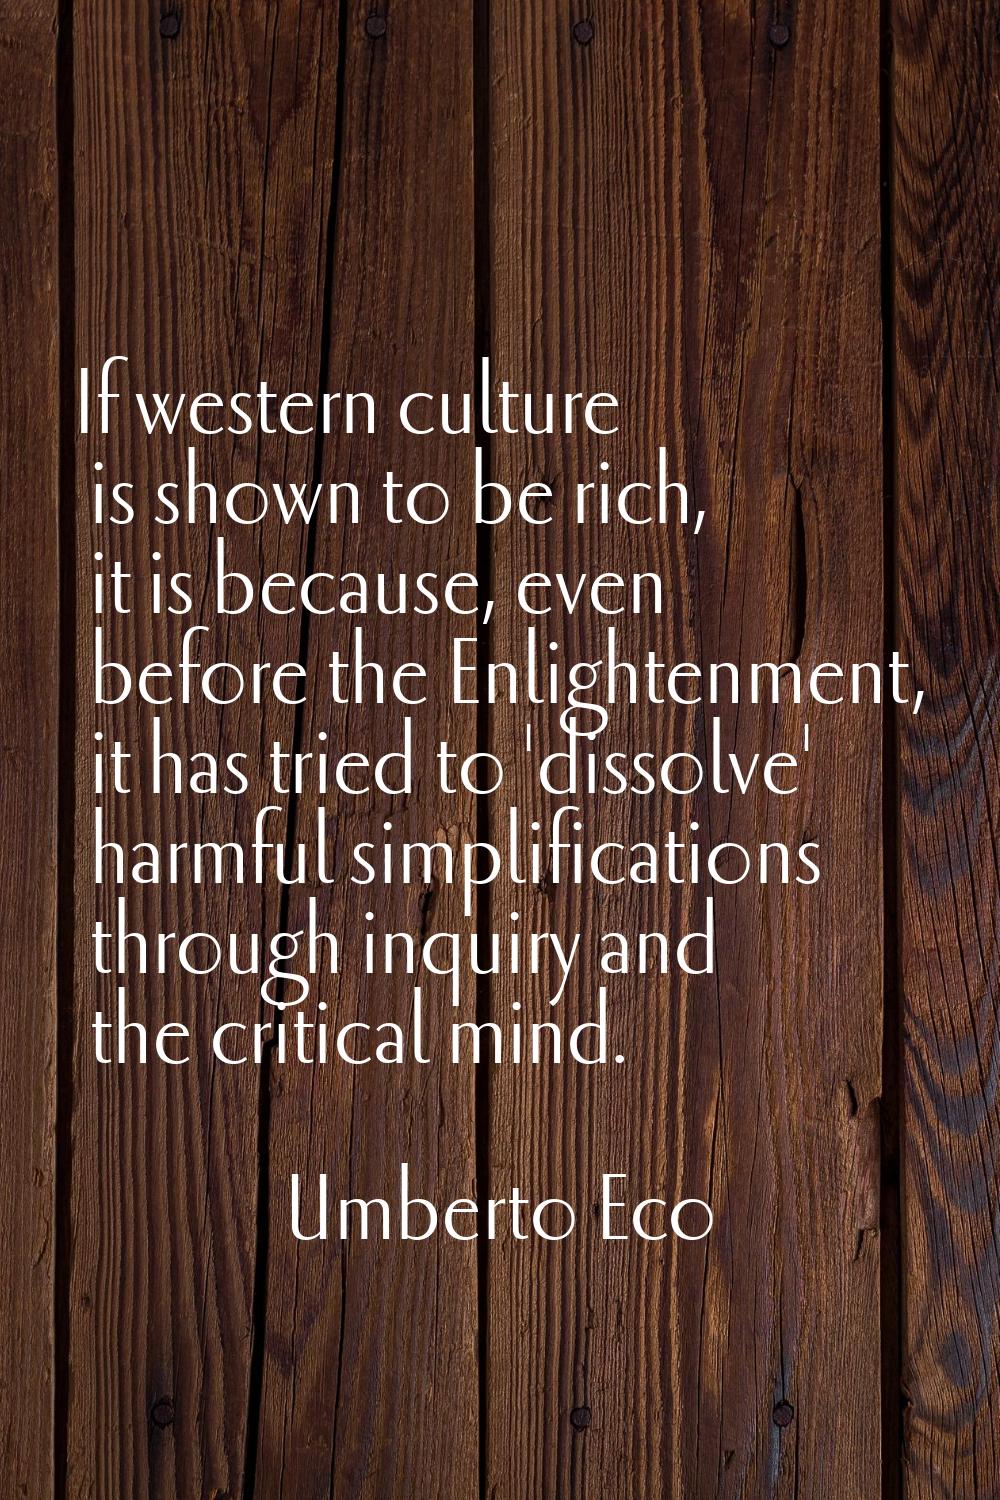 If western culture is shown to be rich, it is because, even before the Enlightenment, it has tried 